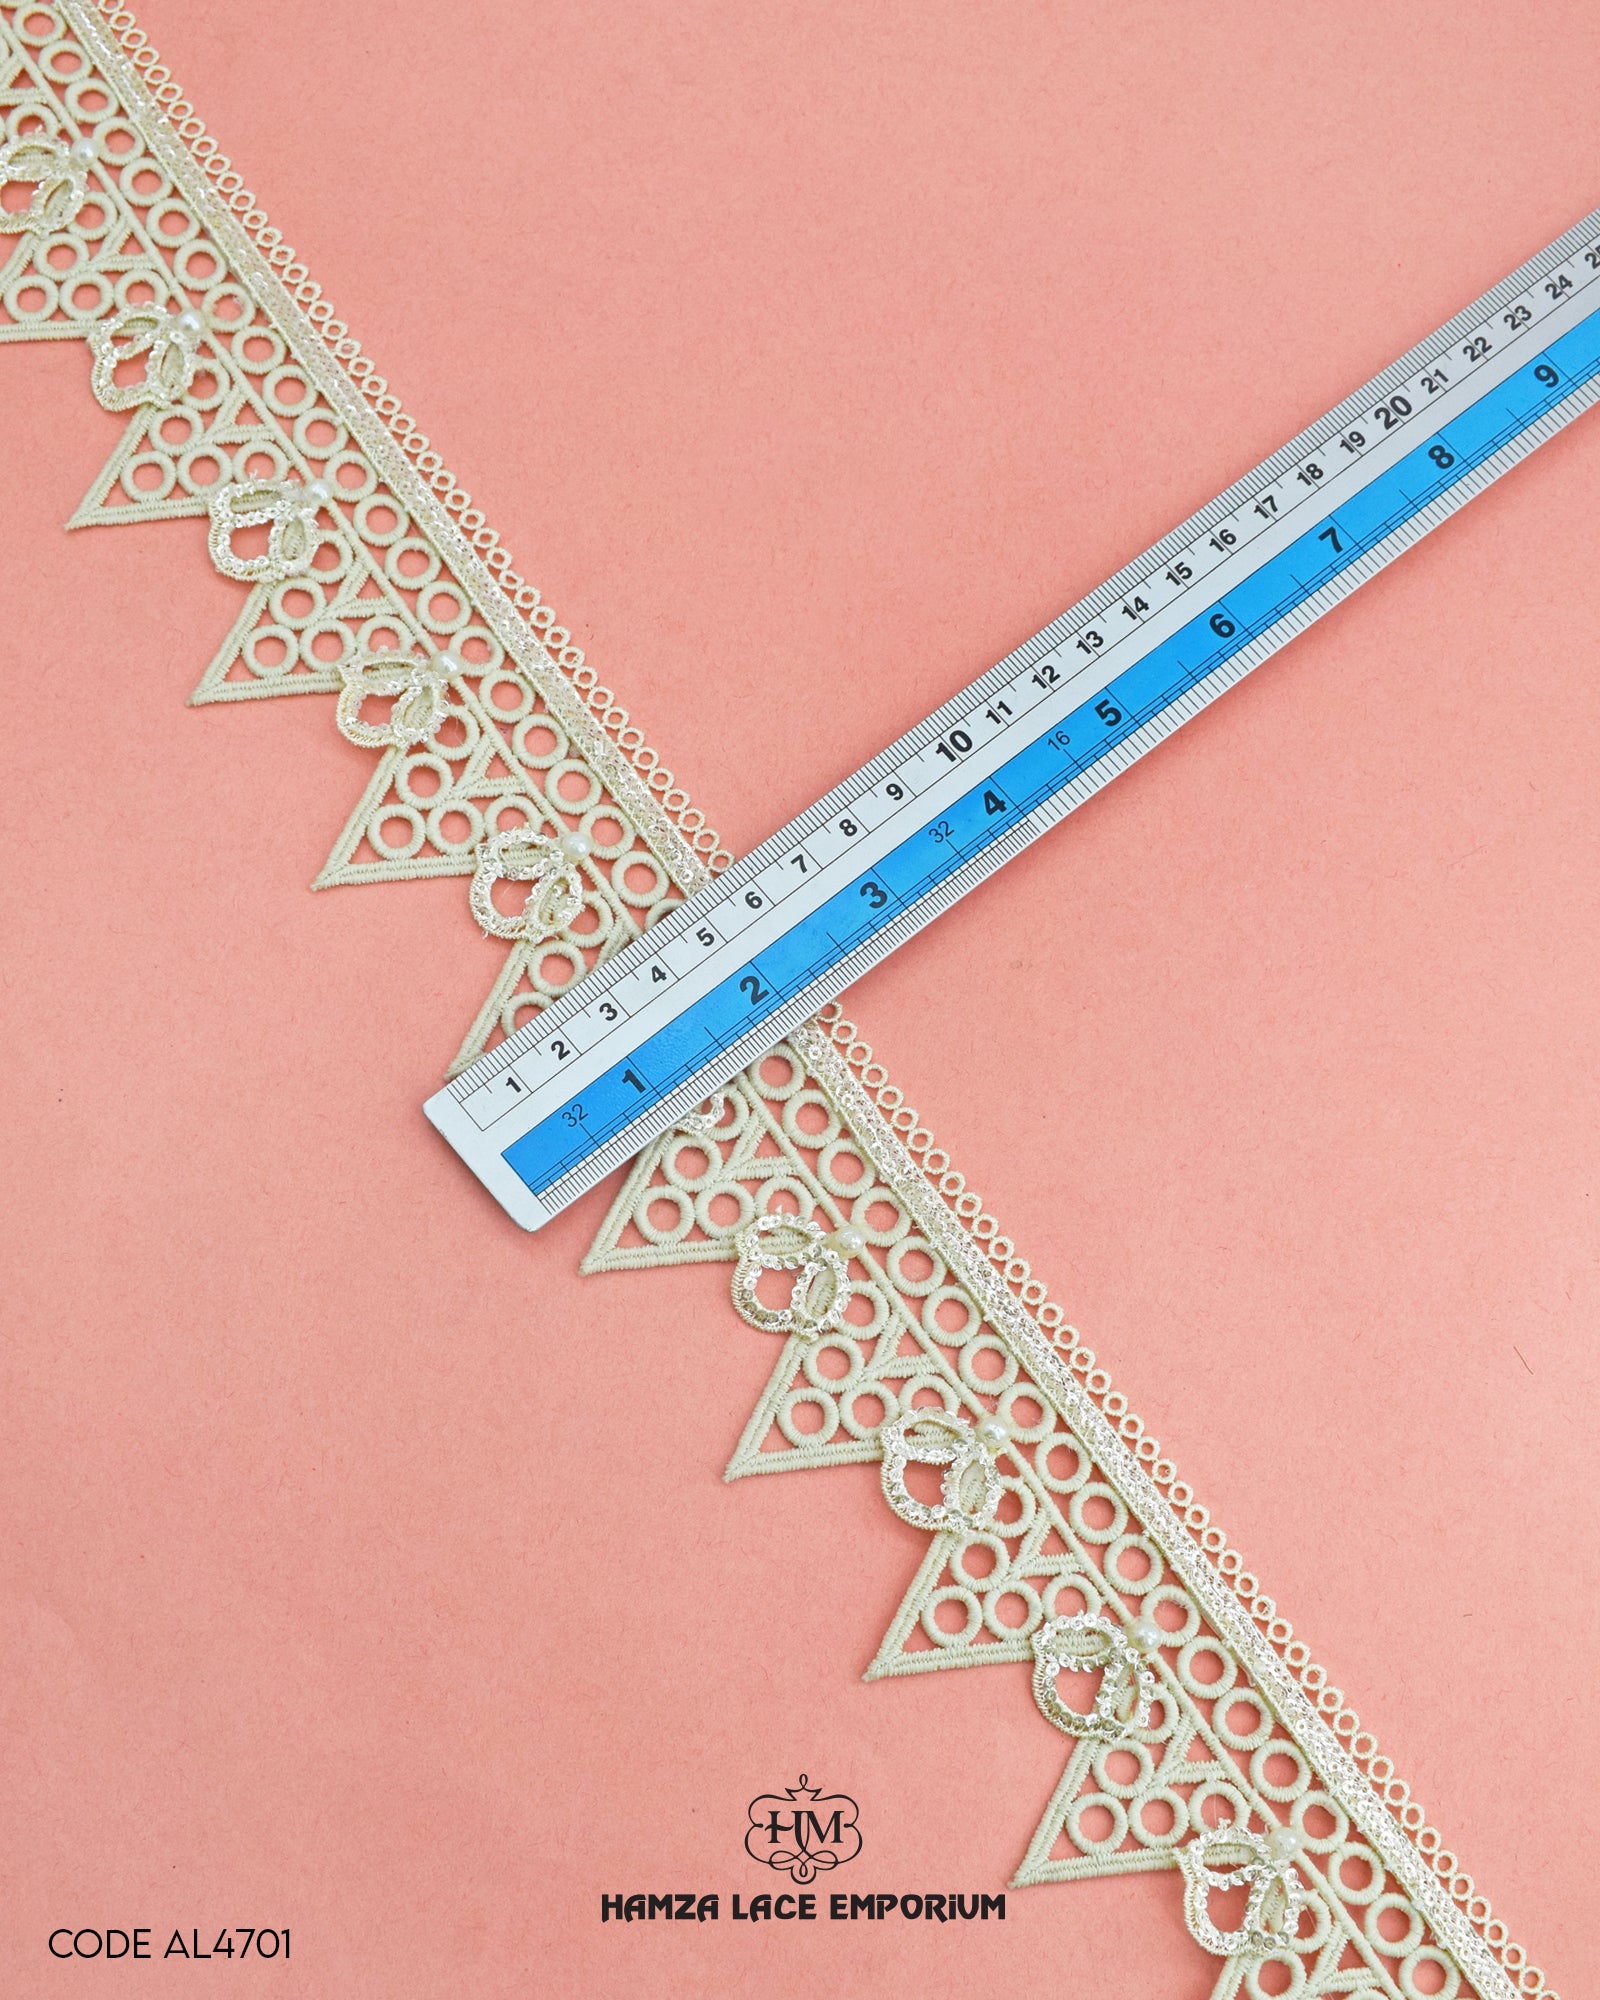 The Size of the 'Sequence Work Edging Lace AL4701' is given